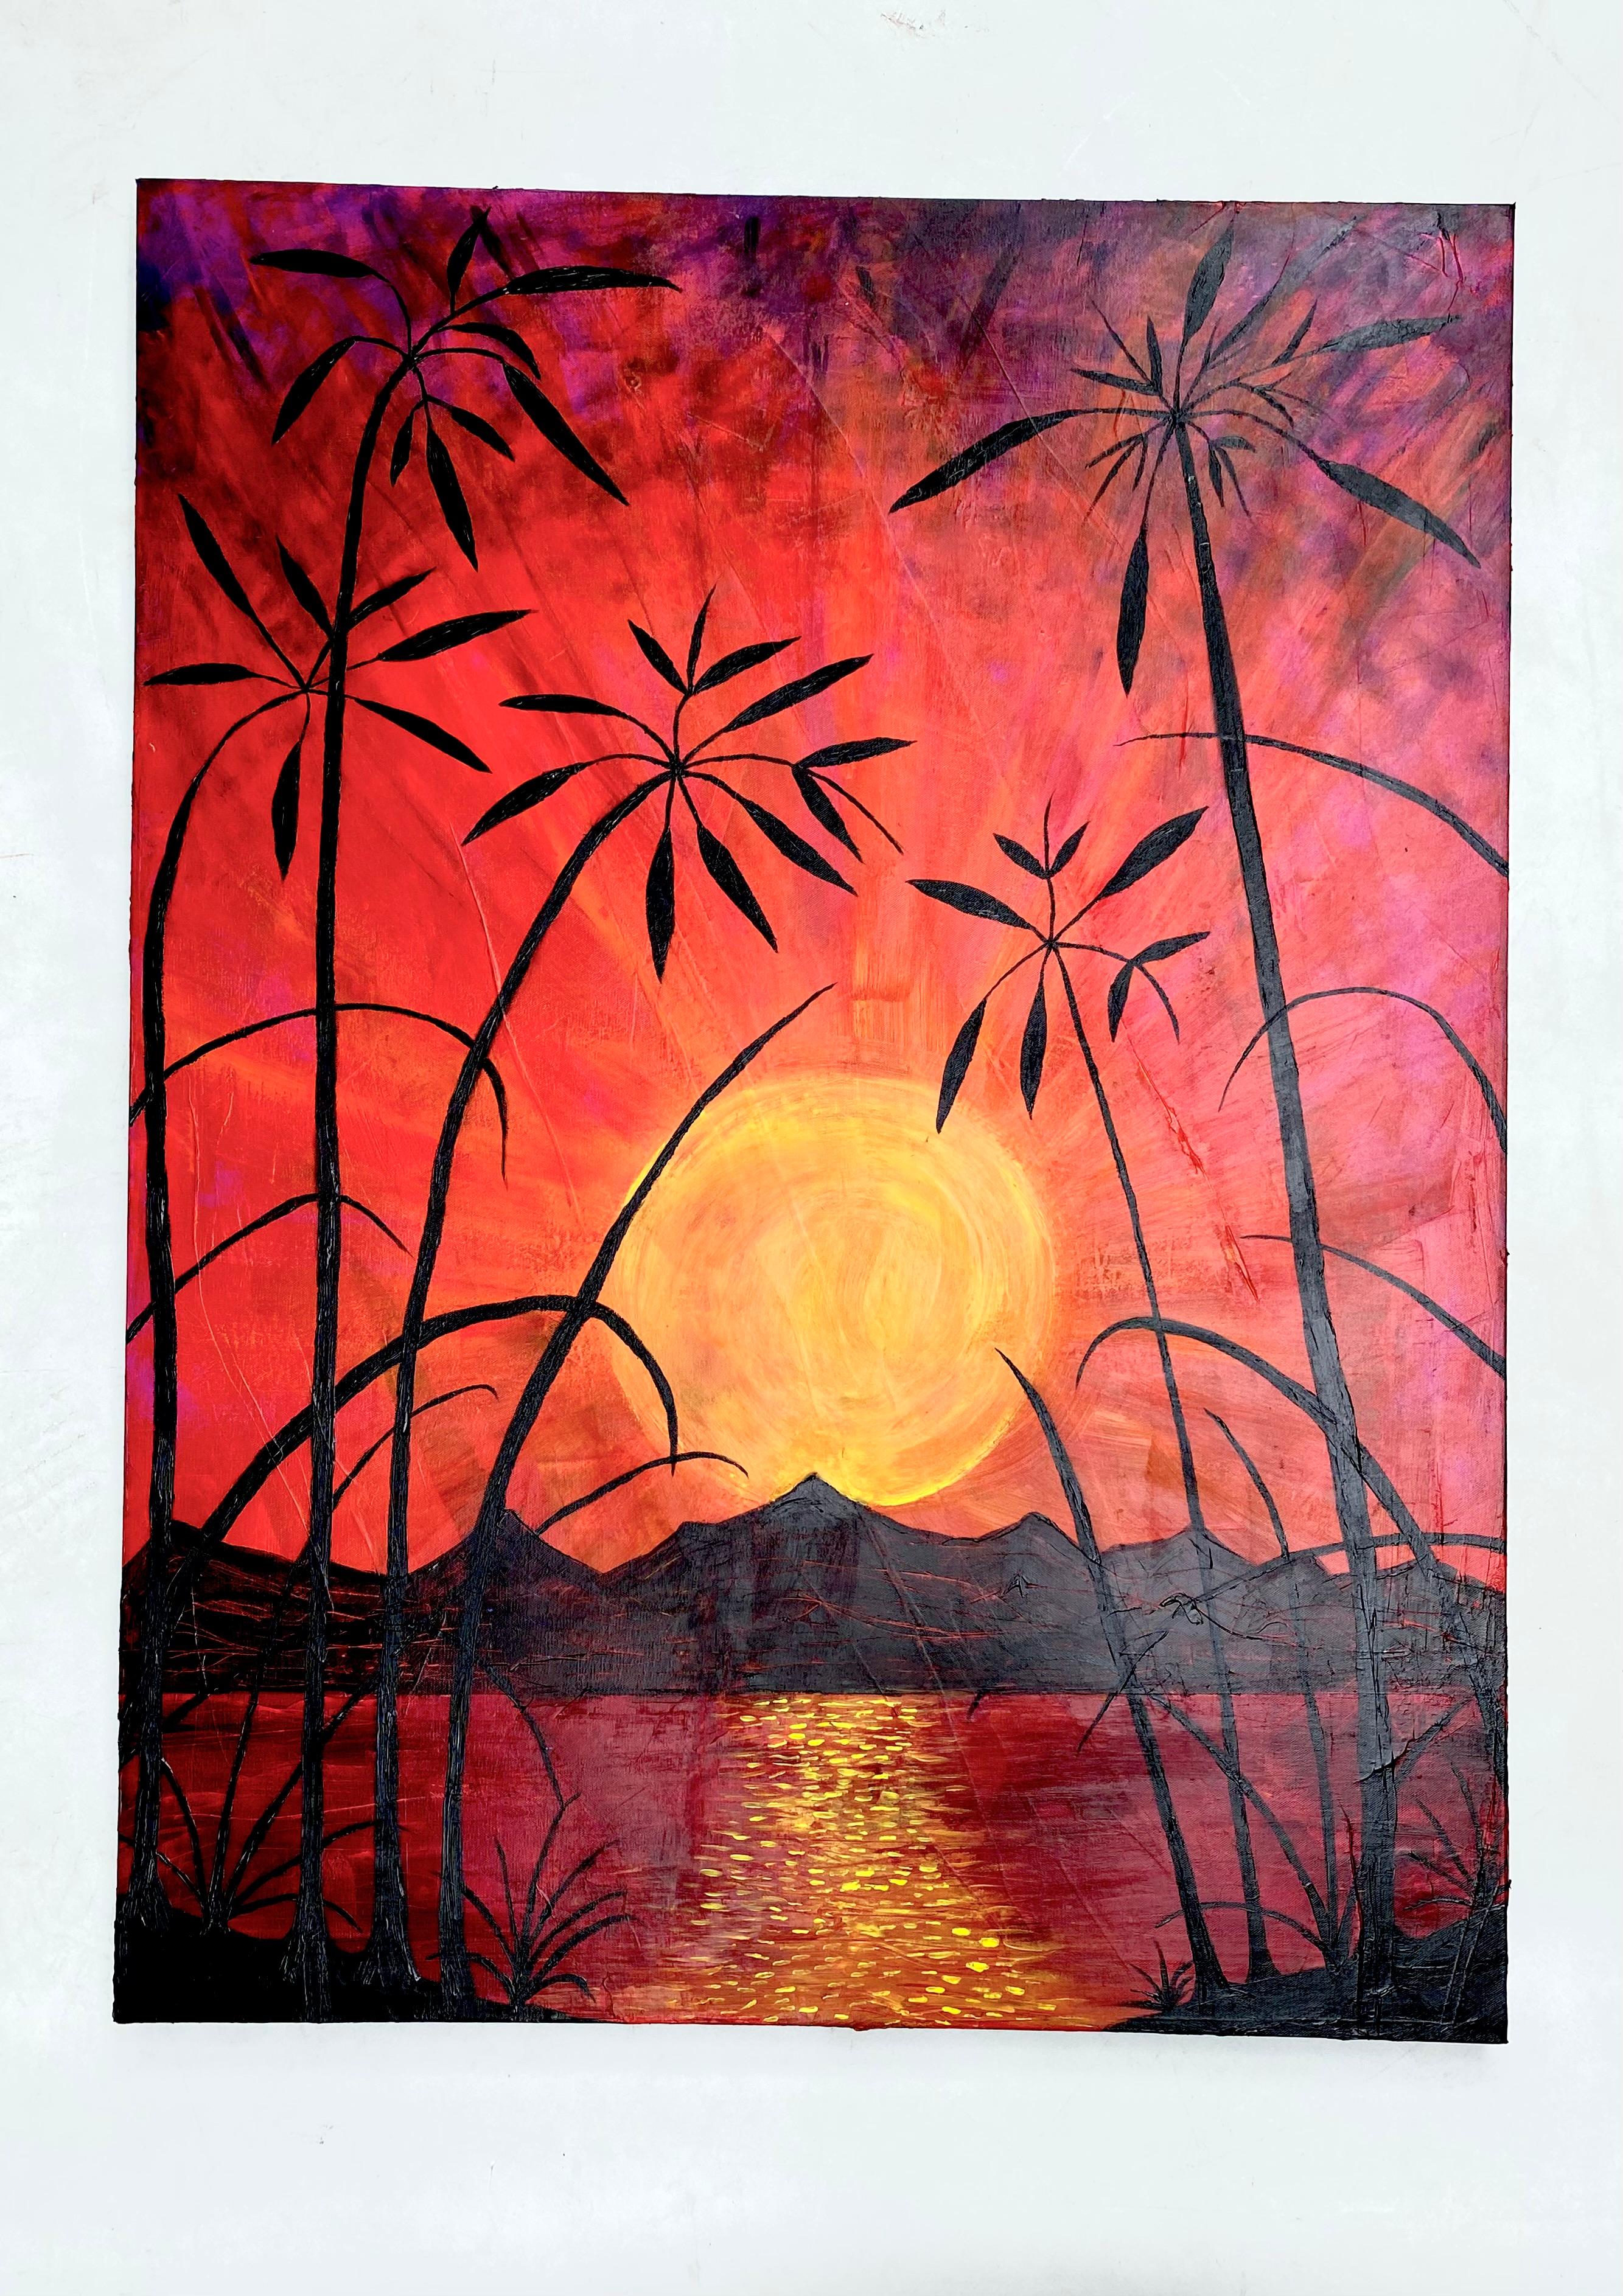 Sunset Lanscape Painting Signed and Dated by Rexx Fischer 

Offered for sale is a colorful painting of the sun setting over a mountain and lake landscape with a bamboo silhouette in the foreground. The painting is signed and dated in the back. Rexx